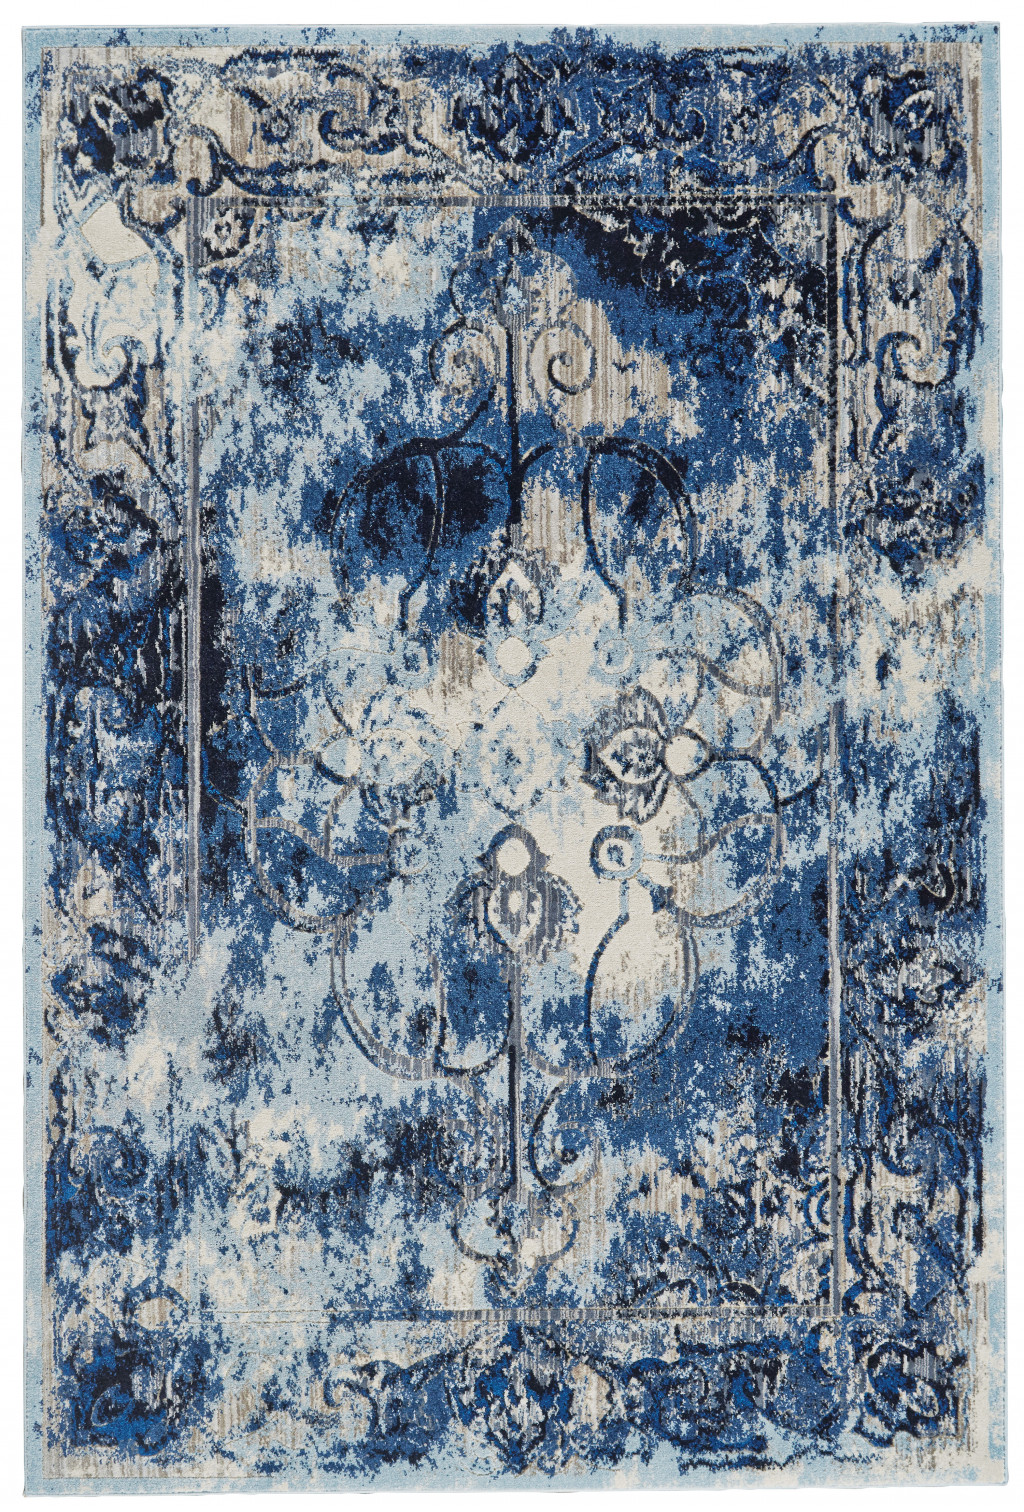 10' X 14' Blue Ivory And Gray Floral Distressed Stain Resistant Area Rug-511246-1